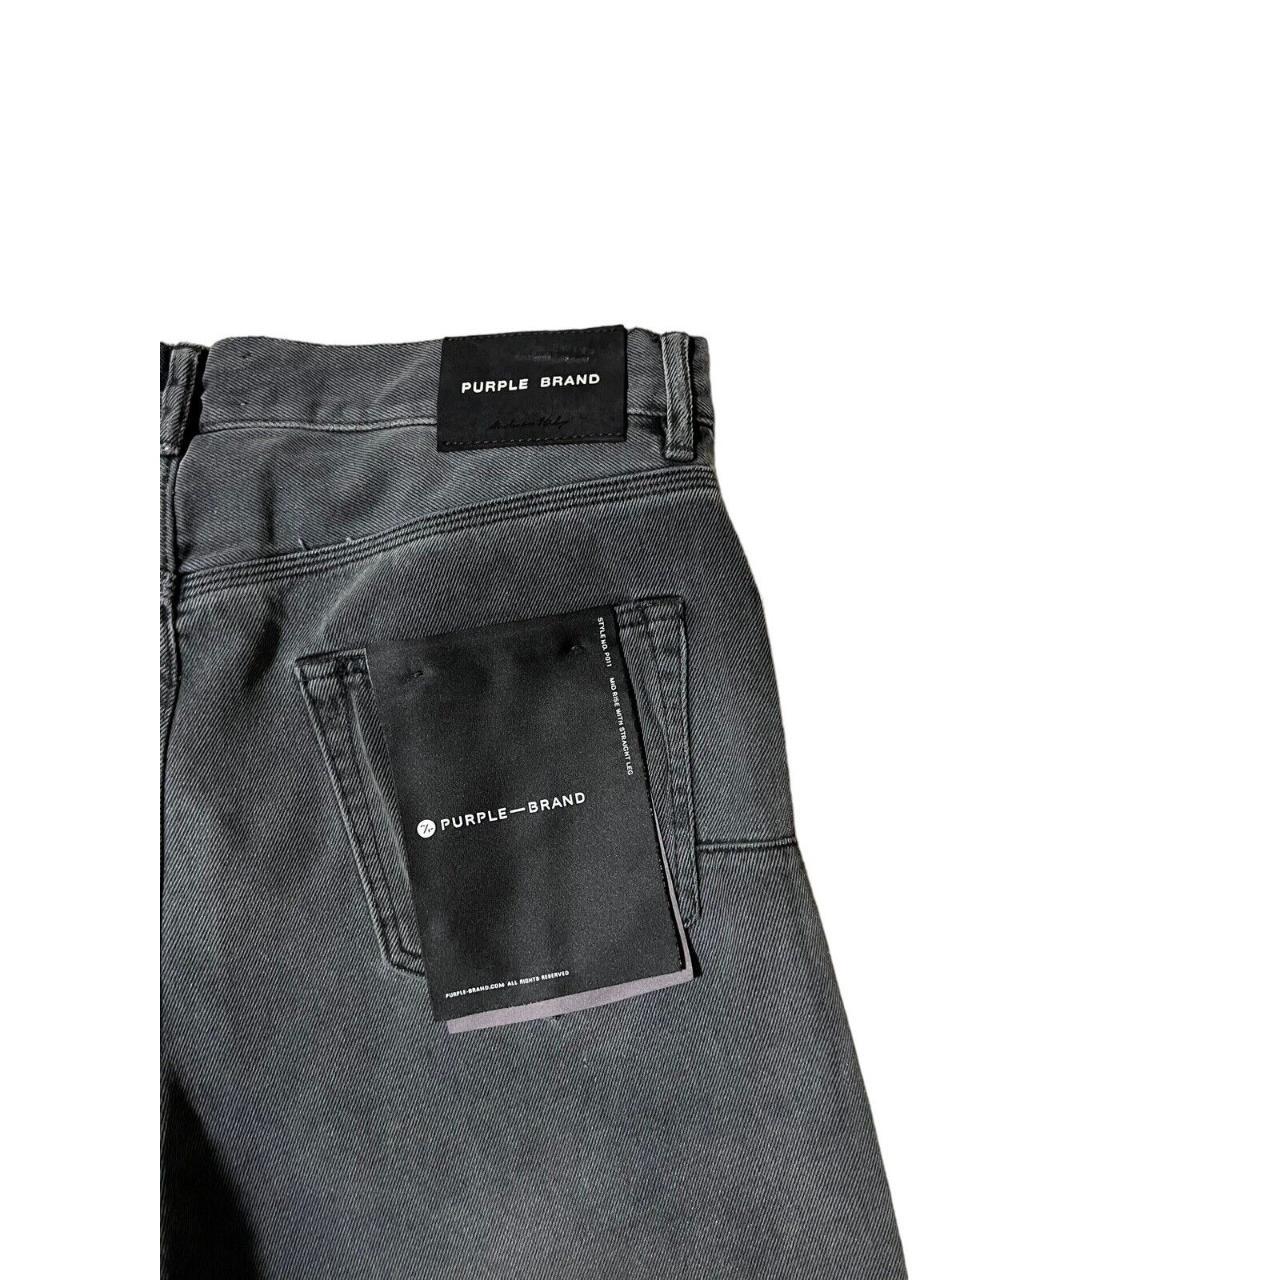 Purple Brand Jeans Mens , Style: Mid Rise with